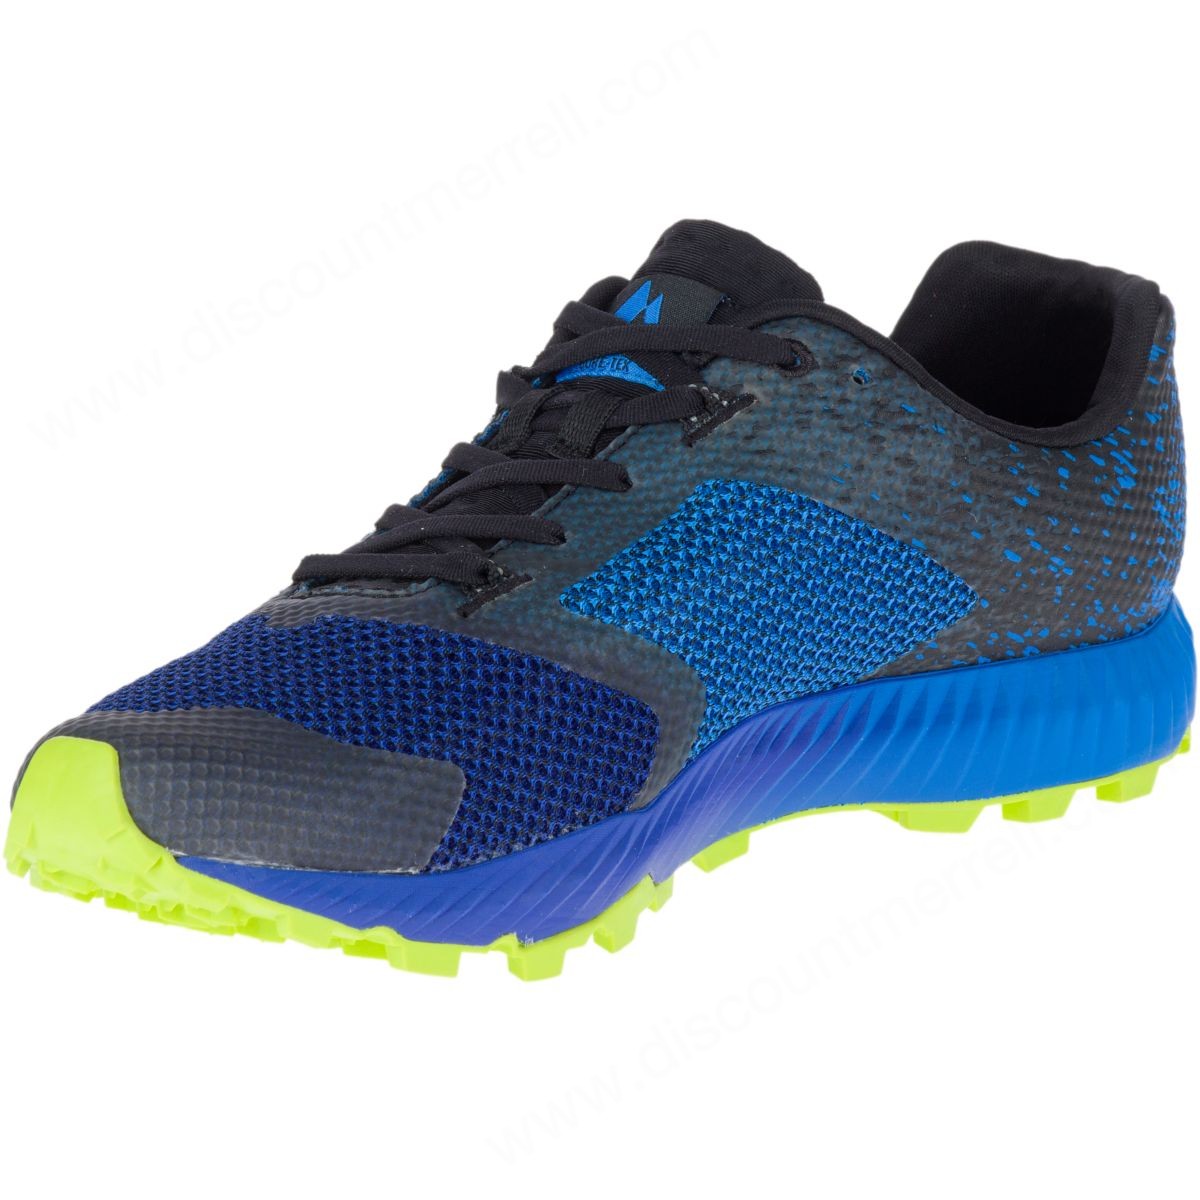 Merrell Man's All Out Crush Gore-Tex® Blueberry - -5